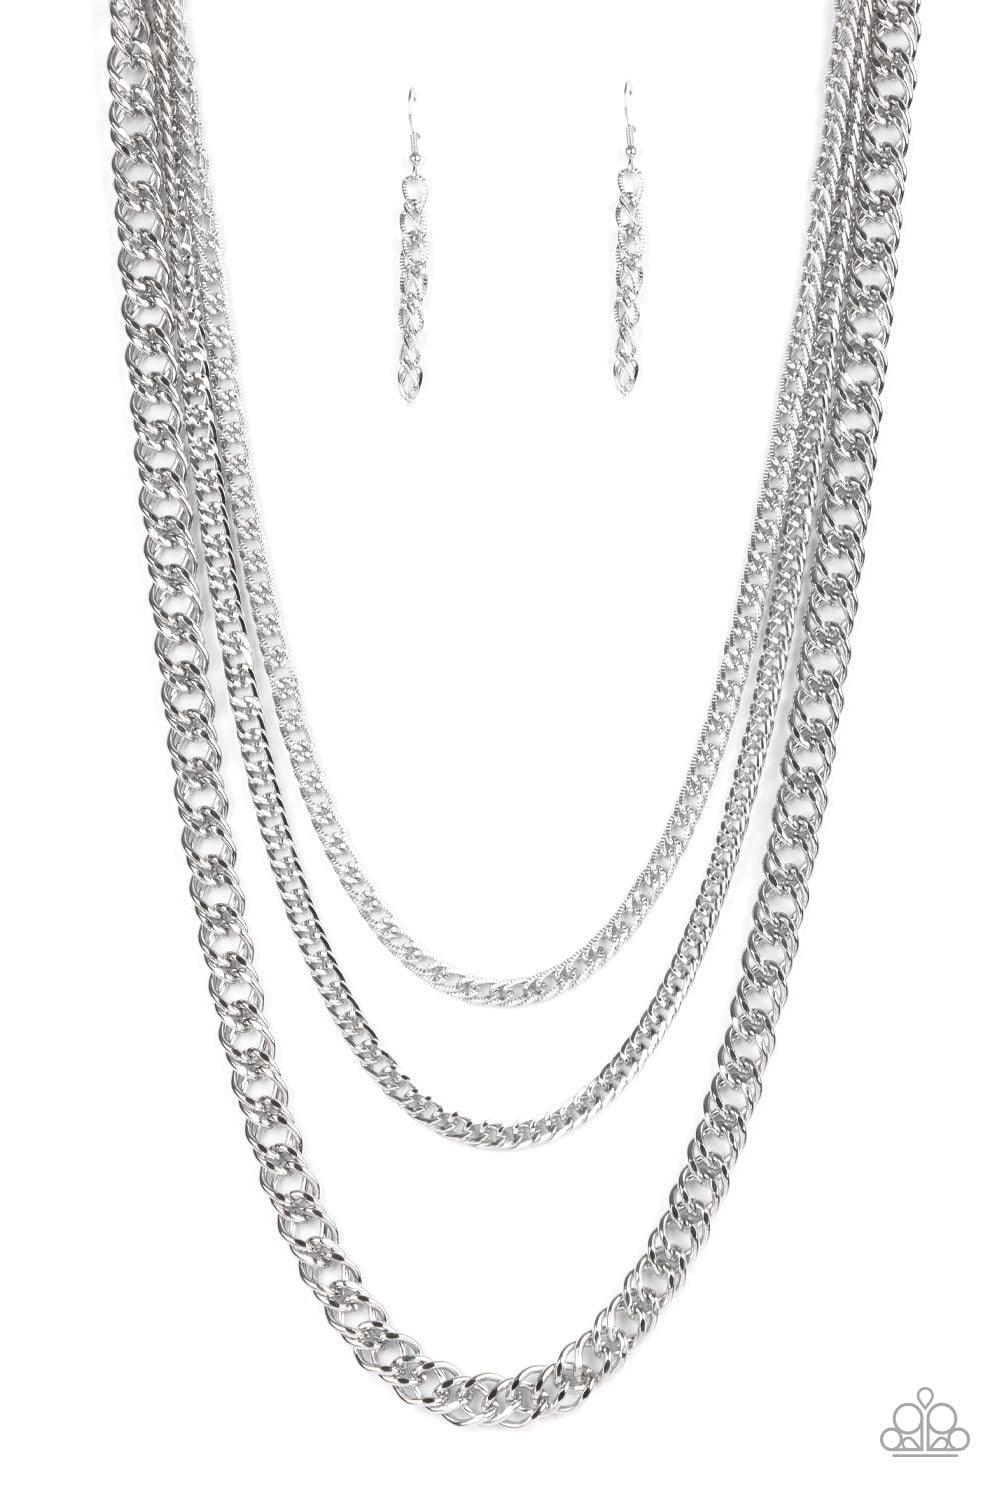 Paparazzi Accessories - Chain Of Champions - Silver Necklace - Bling by JessieK